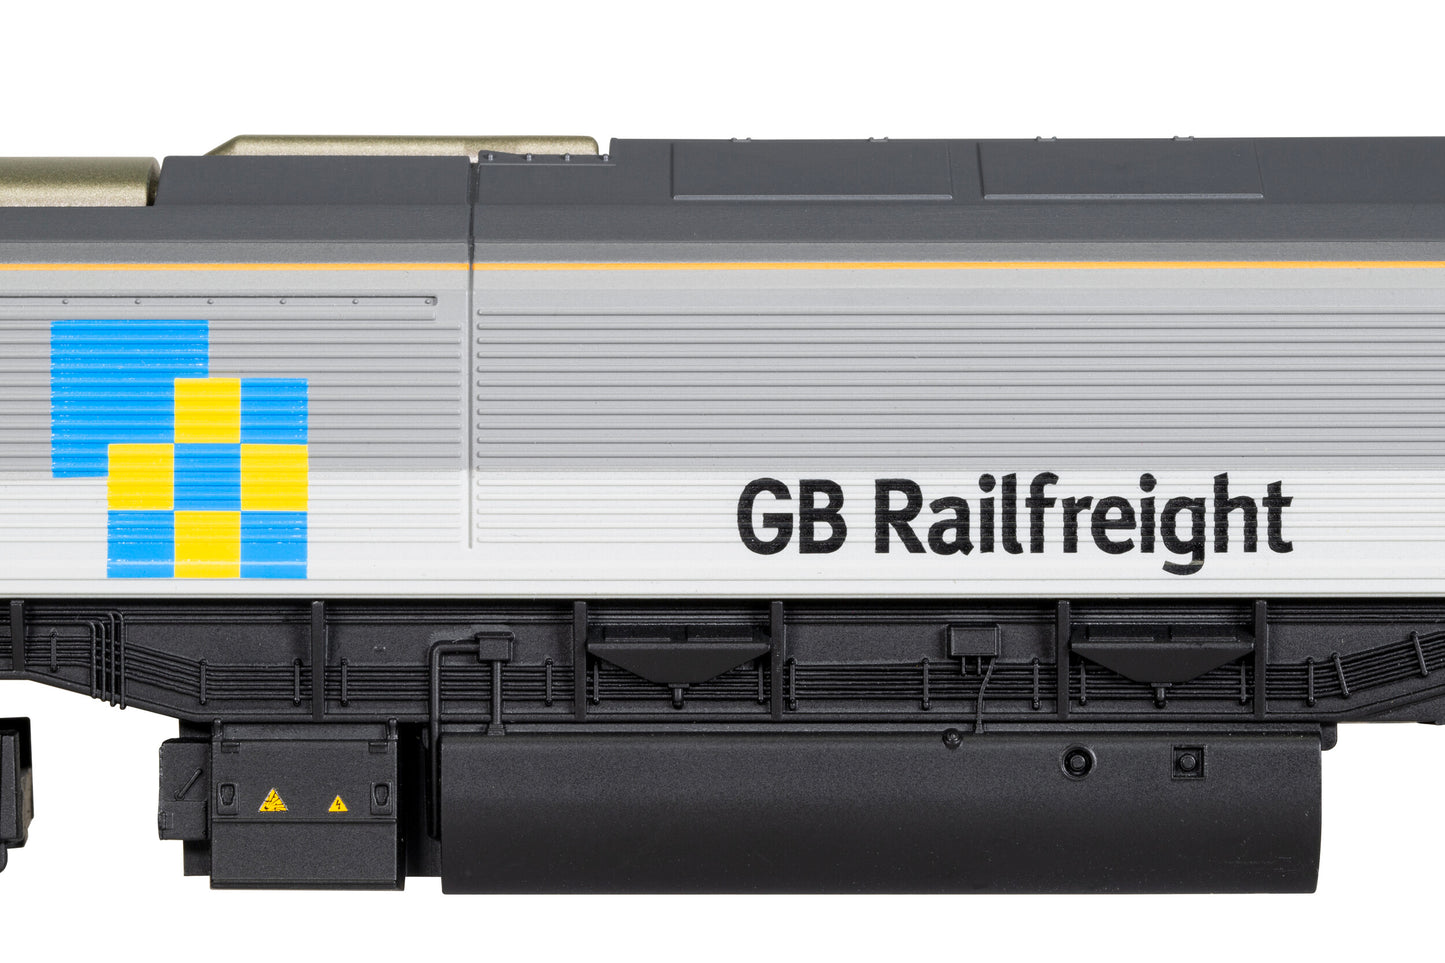 Hornby R30152 - GBRf Class 66 Co-Co No. 66793